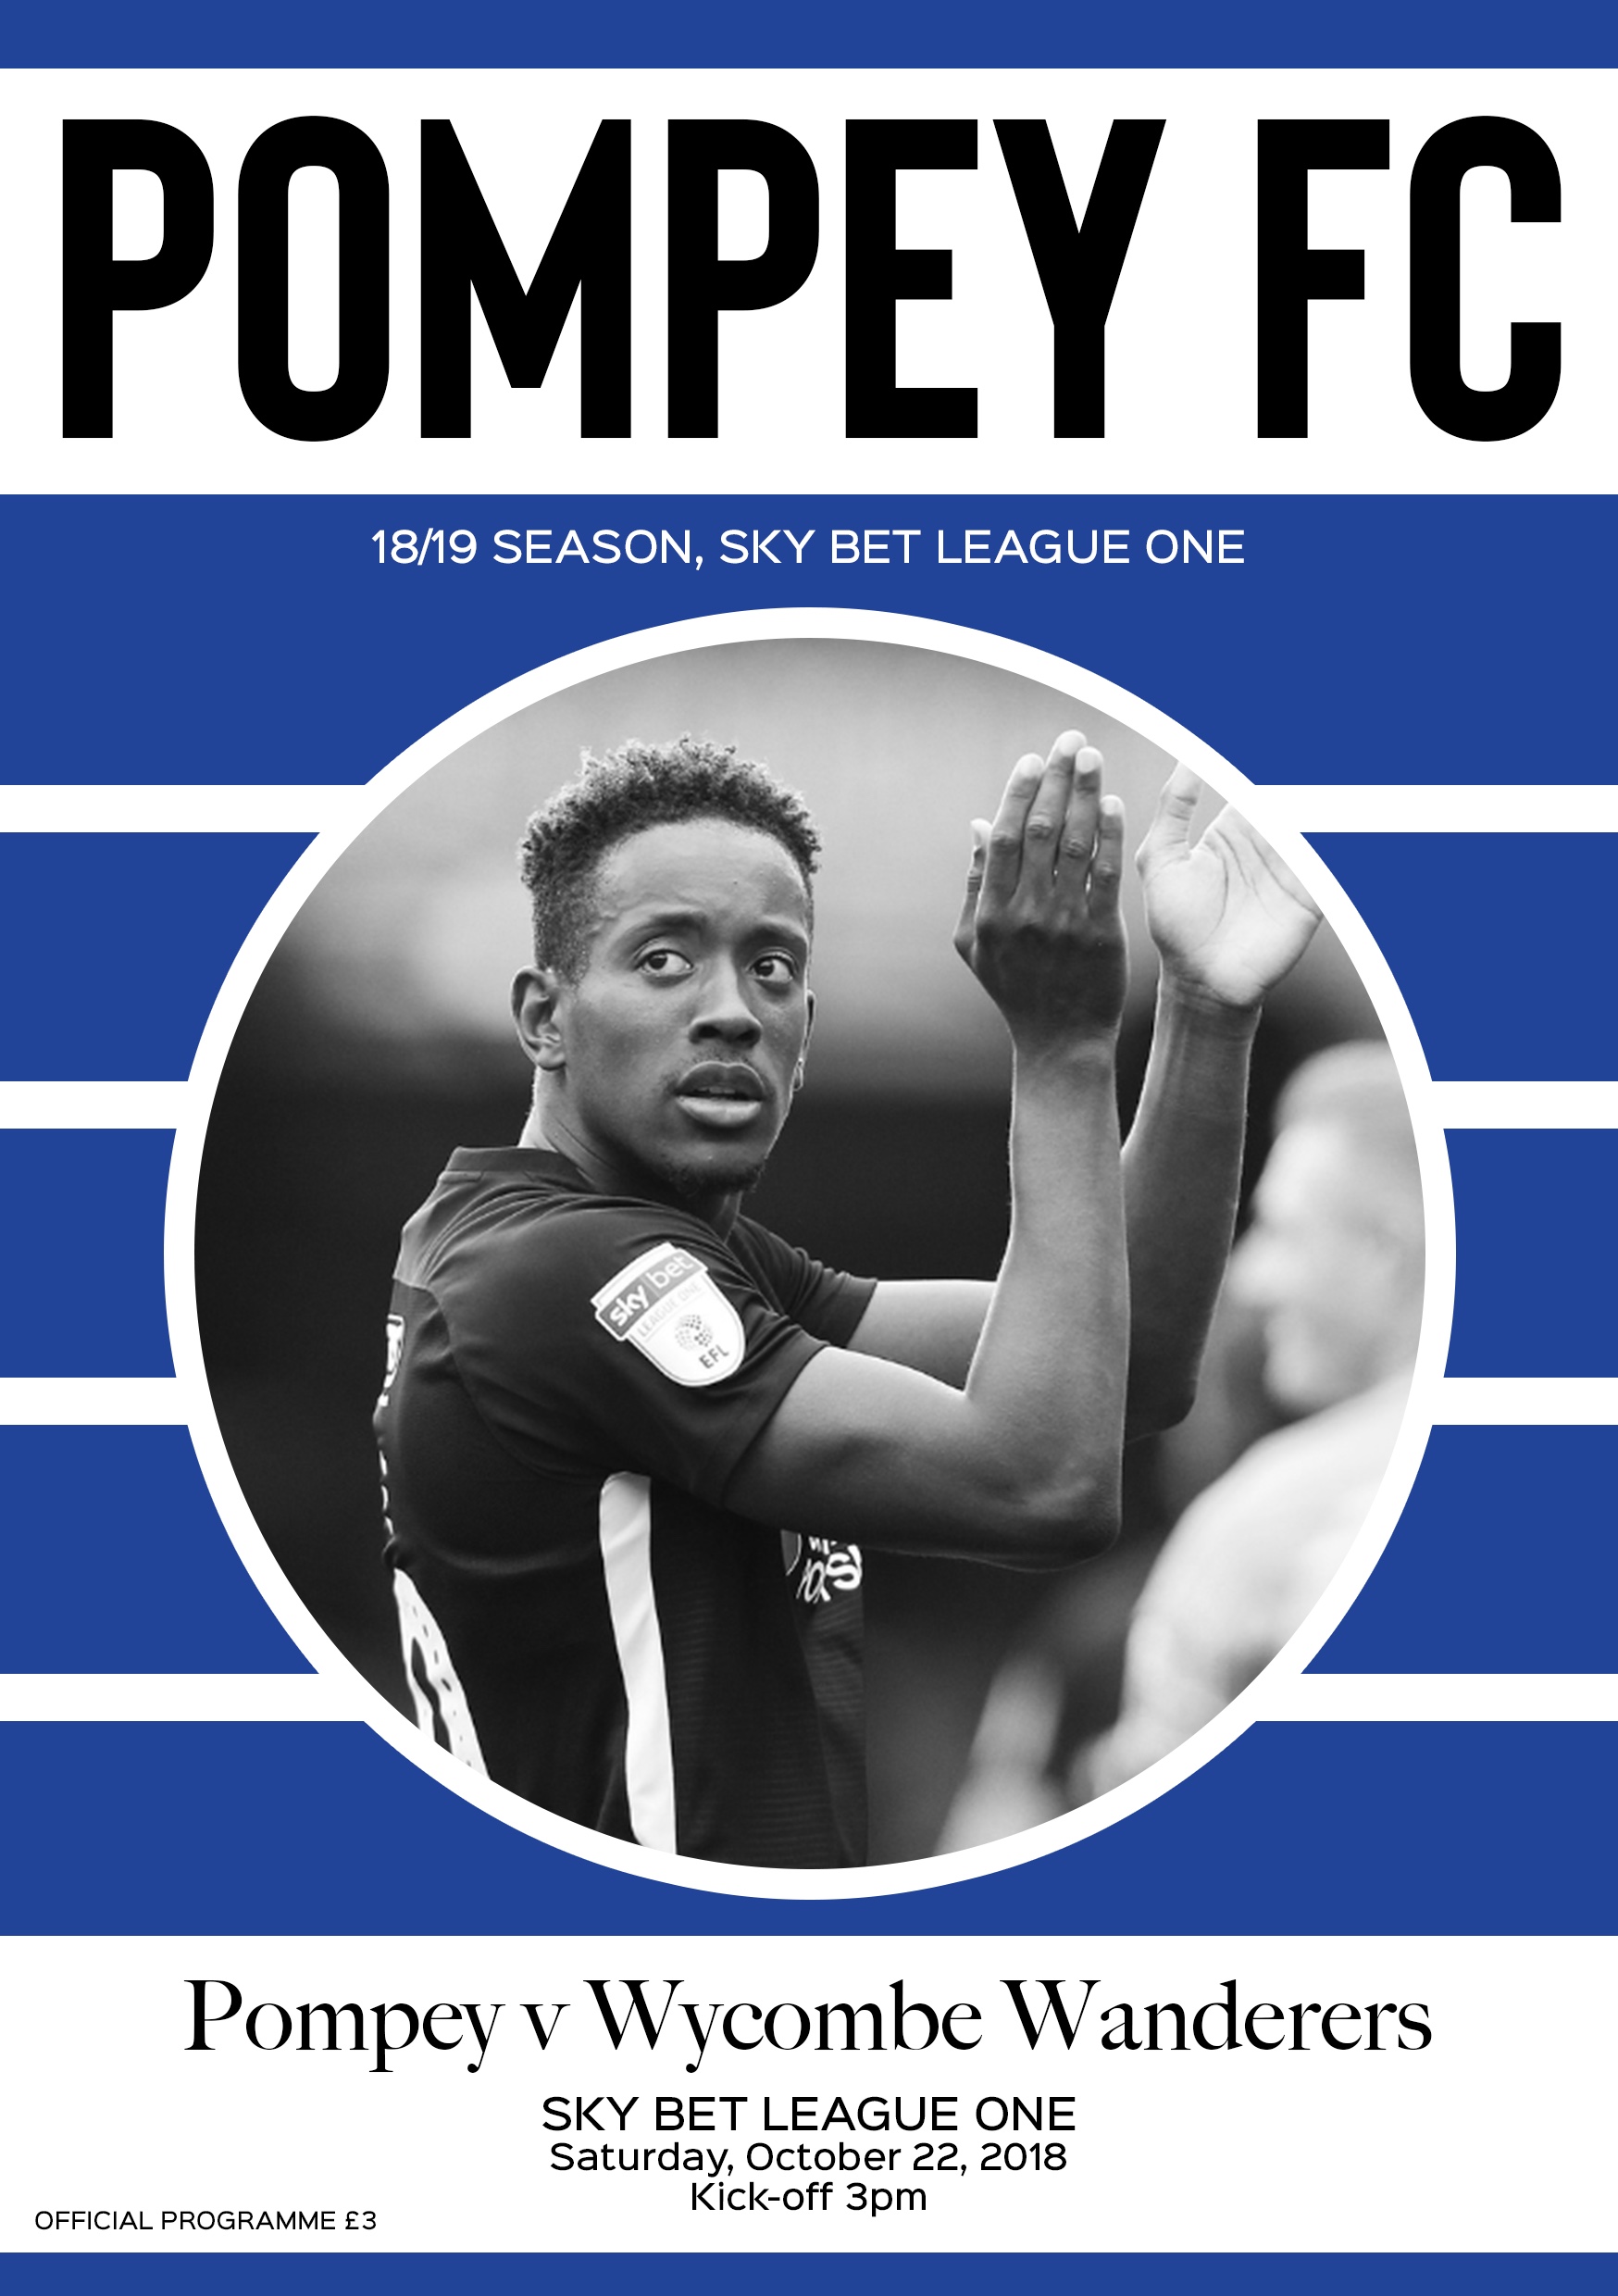 Modern Portsmouth FC Programme inspired by one for the 70's.